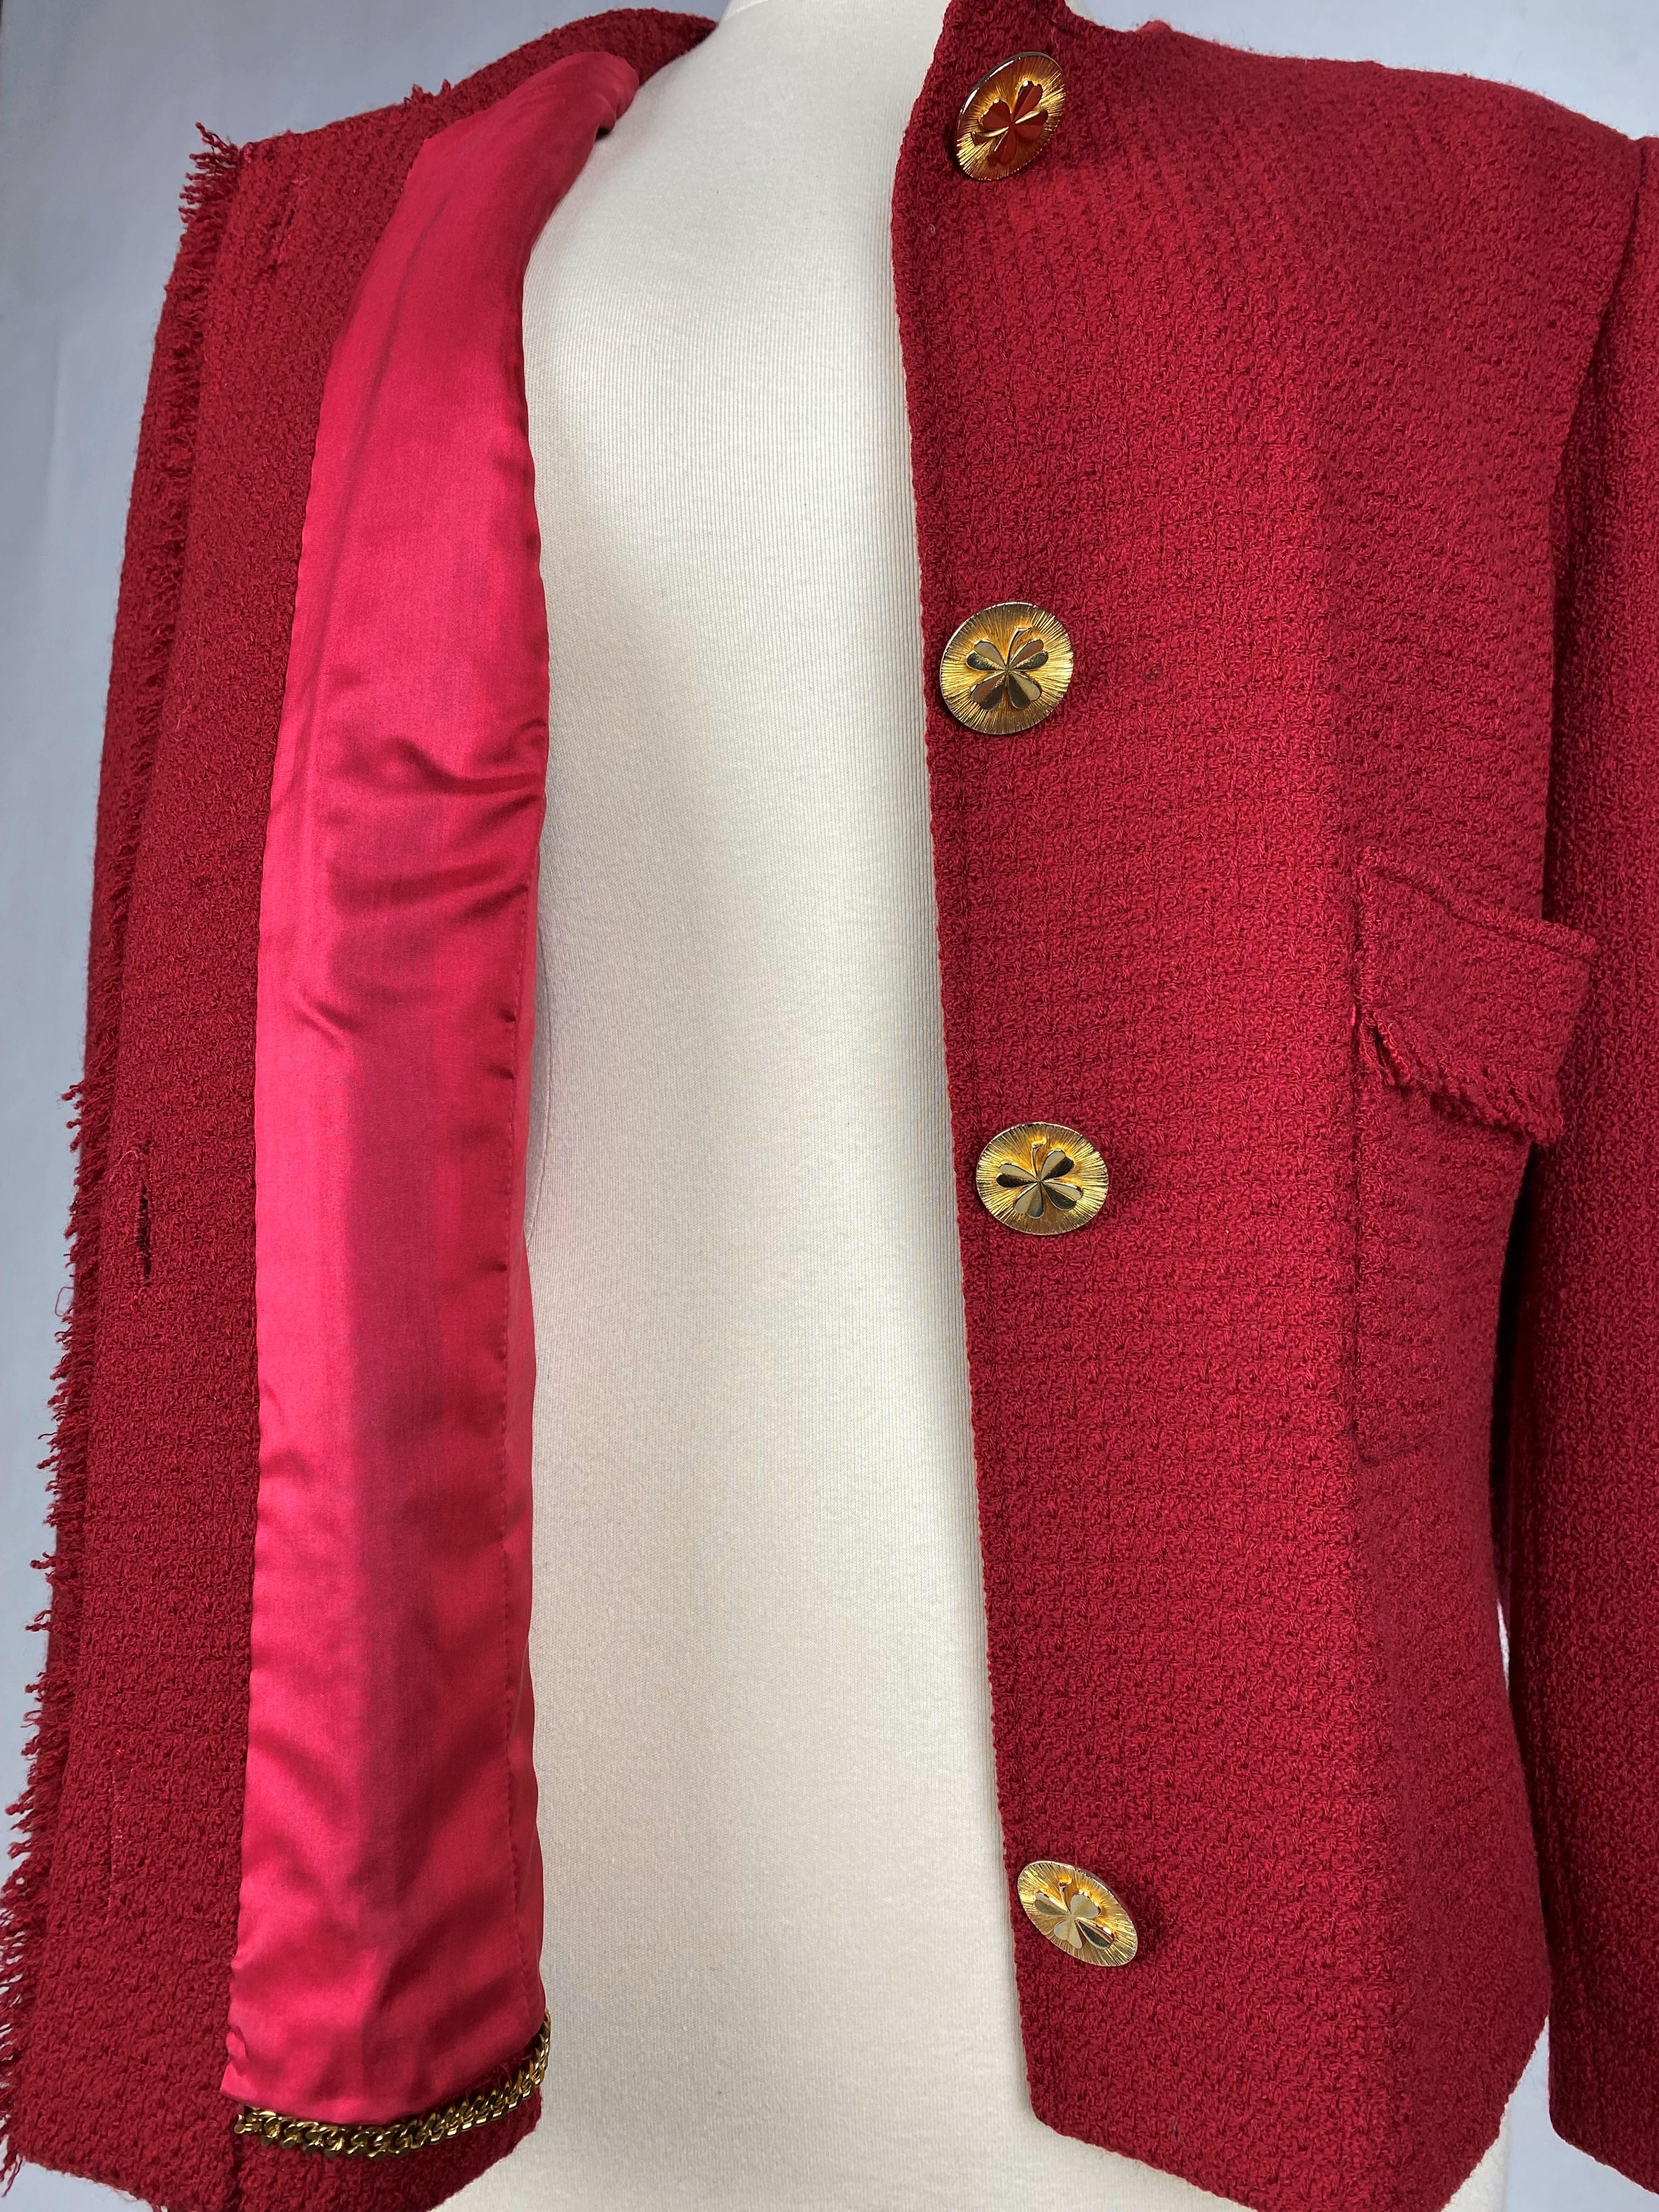 A Chanel - Karl Lagerfeld Red Mohair Wool Jacket Circa 1995-2000 For Sale 4